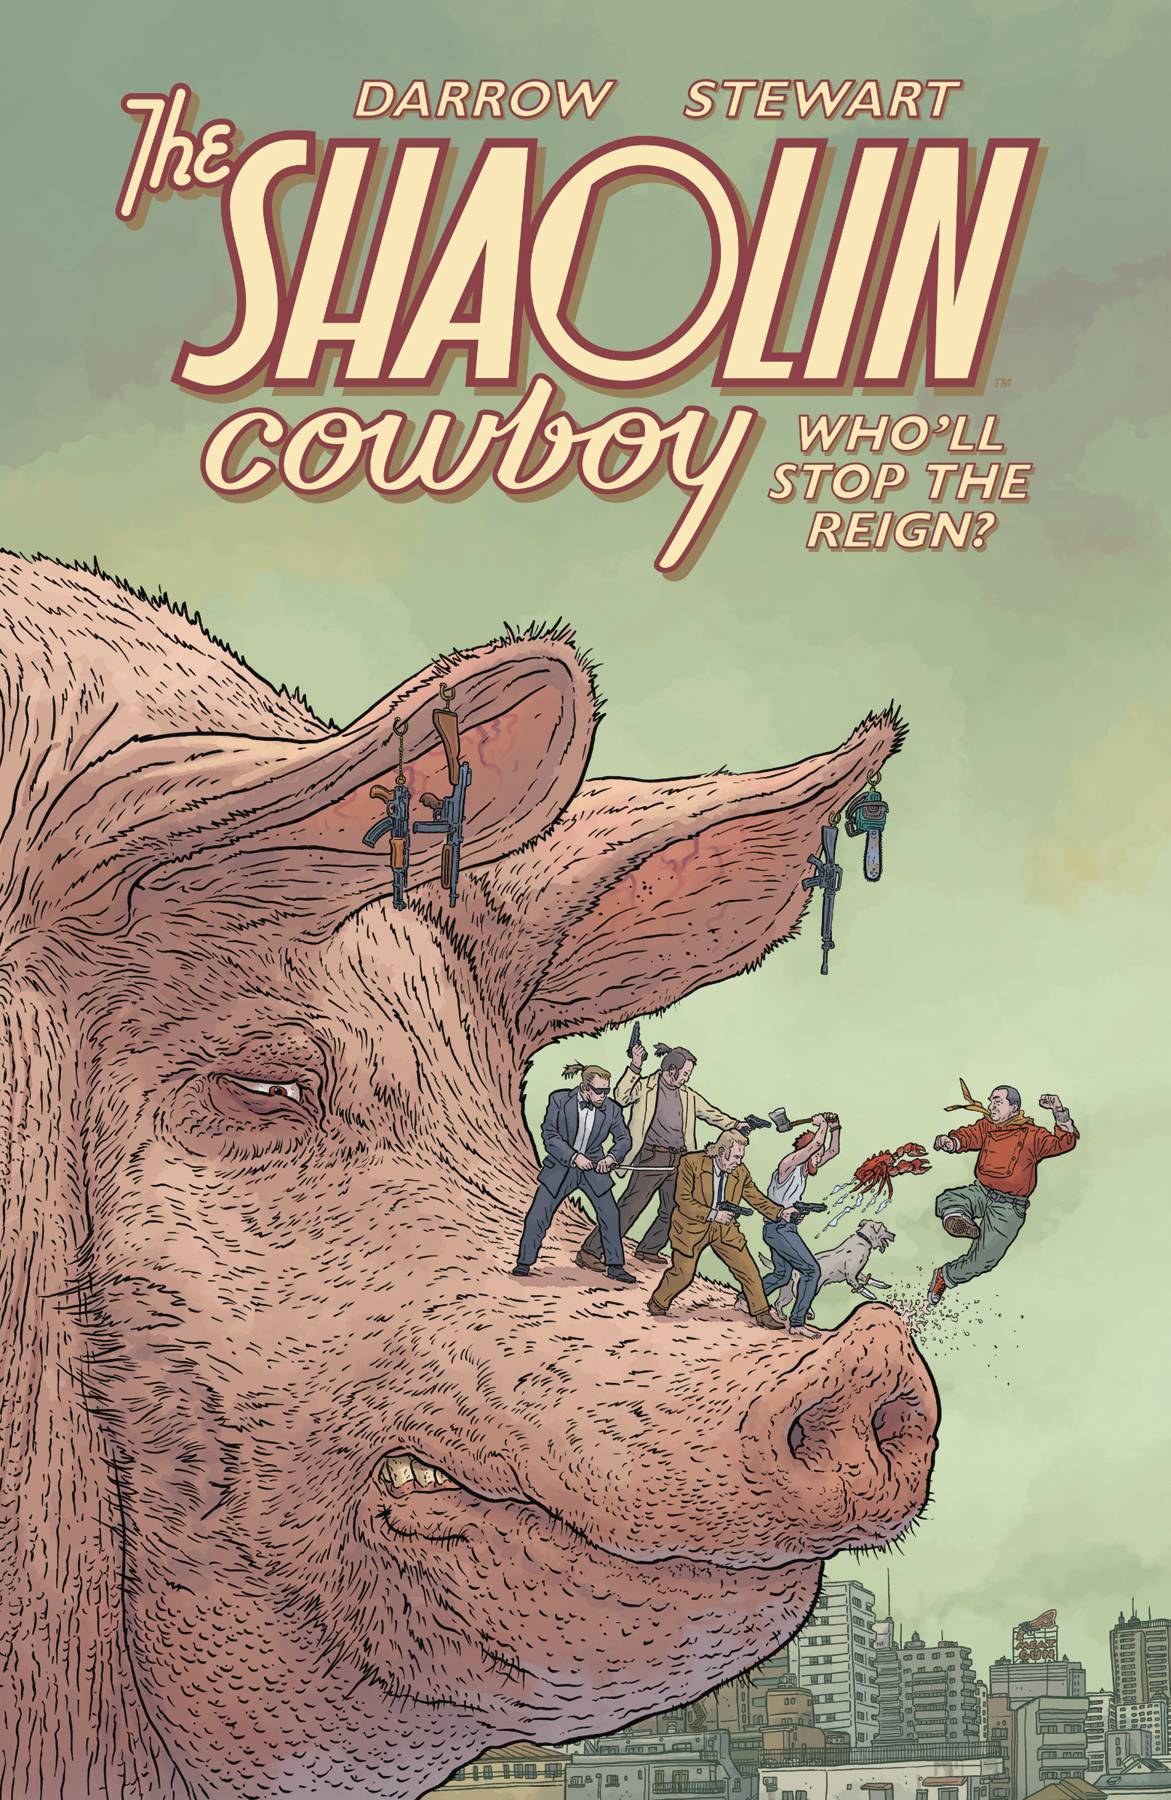 SHAOLIN COWBOY WHO`LL STOP THE REIGN TP (JAN210305) (MR)